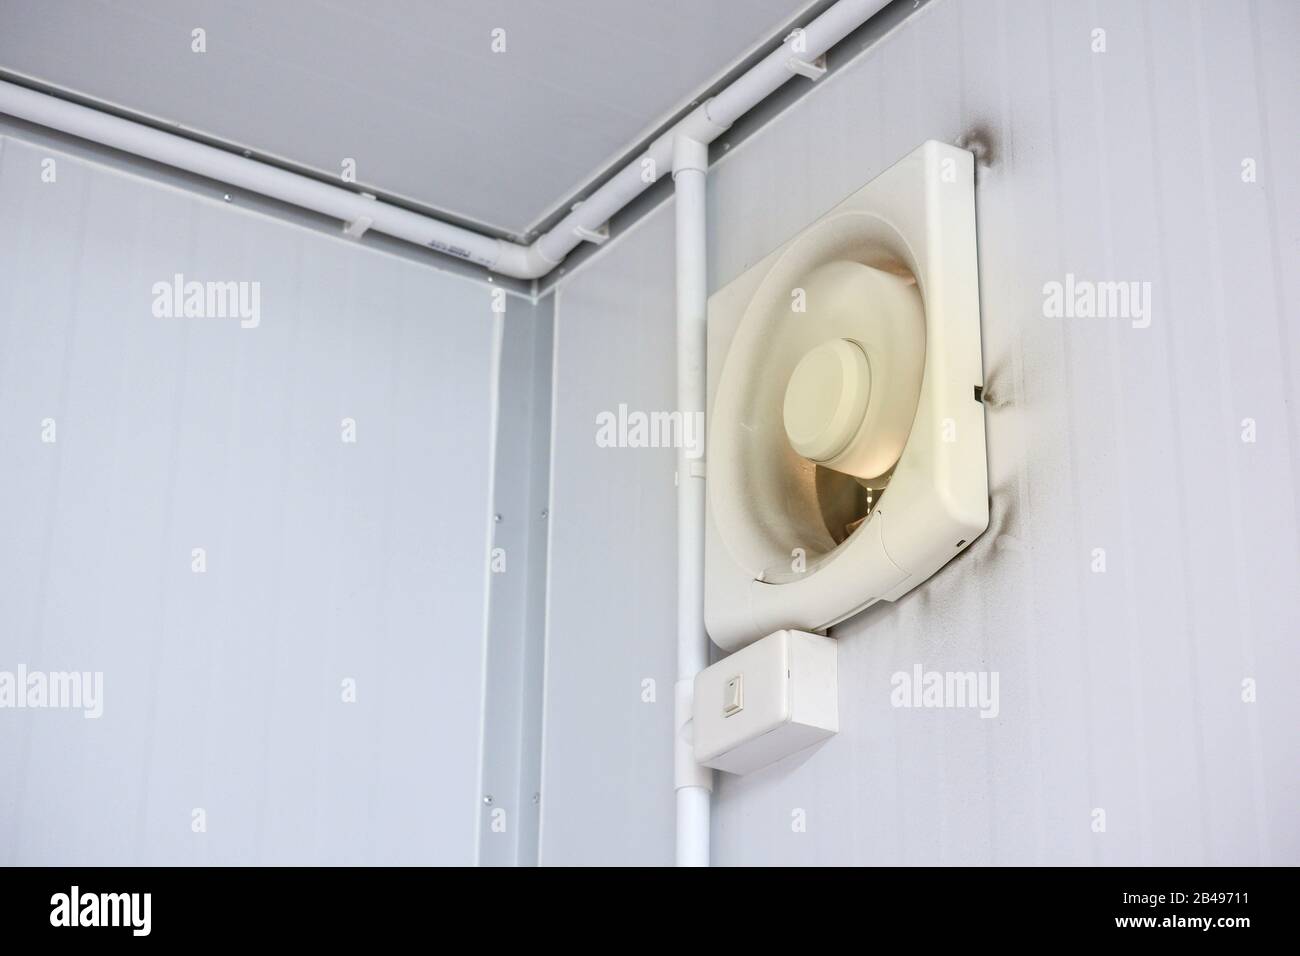 Exhaust Fan High Resolution Stock Photography And Images Alamy